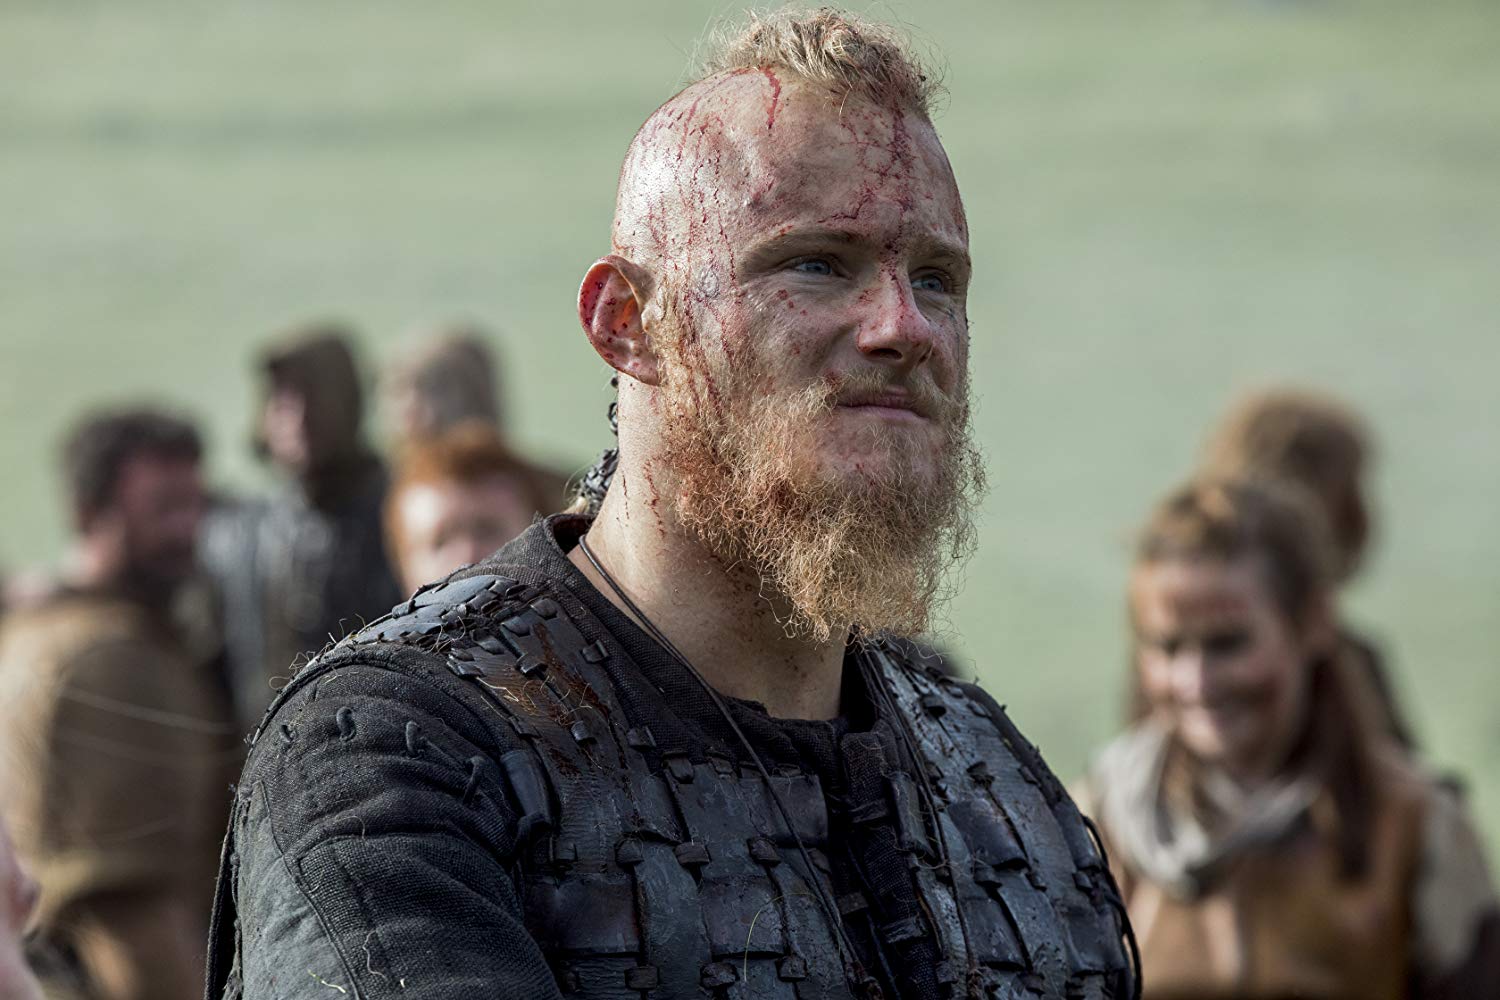 Geek Girl Authority on X: Happy Birthday to Alexander Ludwig, a.k.a. Björn  Lothbrok, a.k.a. Cato! #Vikings #TheHungerGames  / X